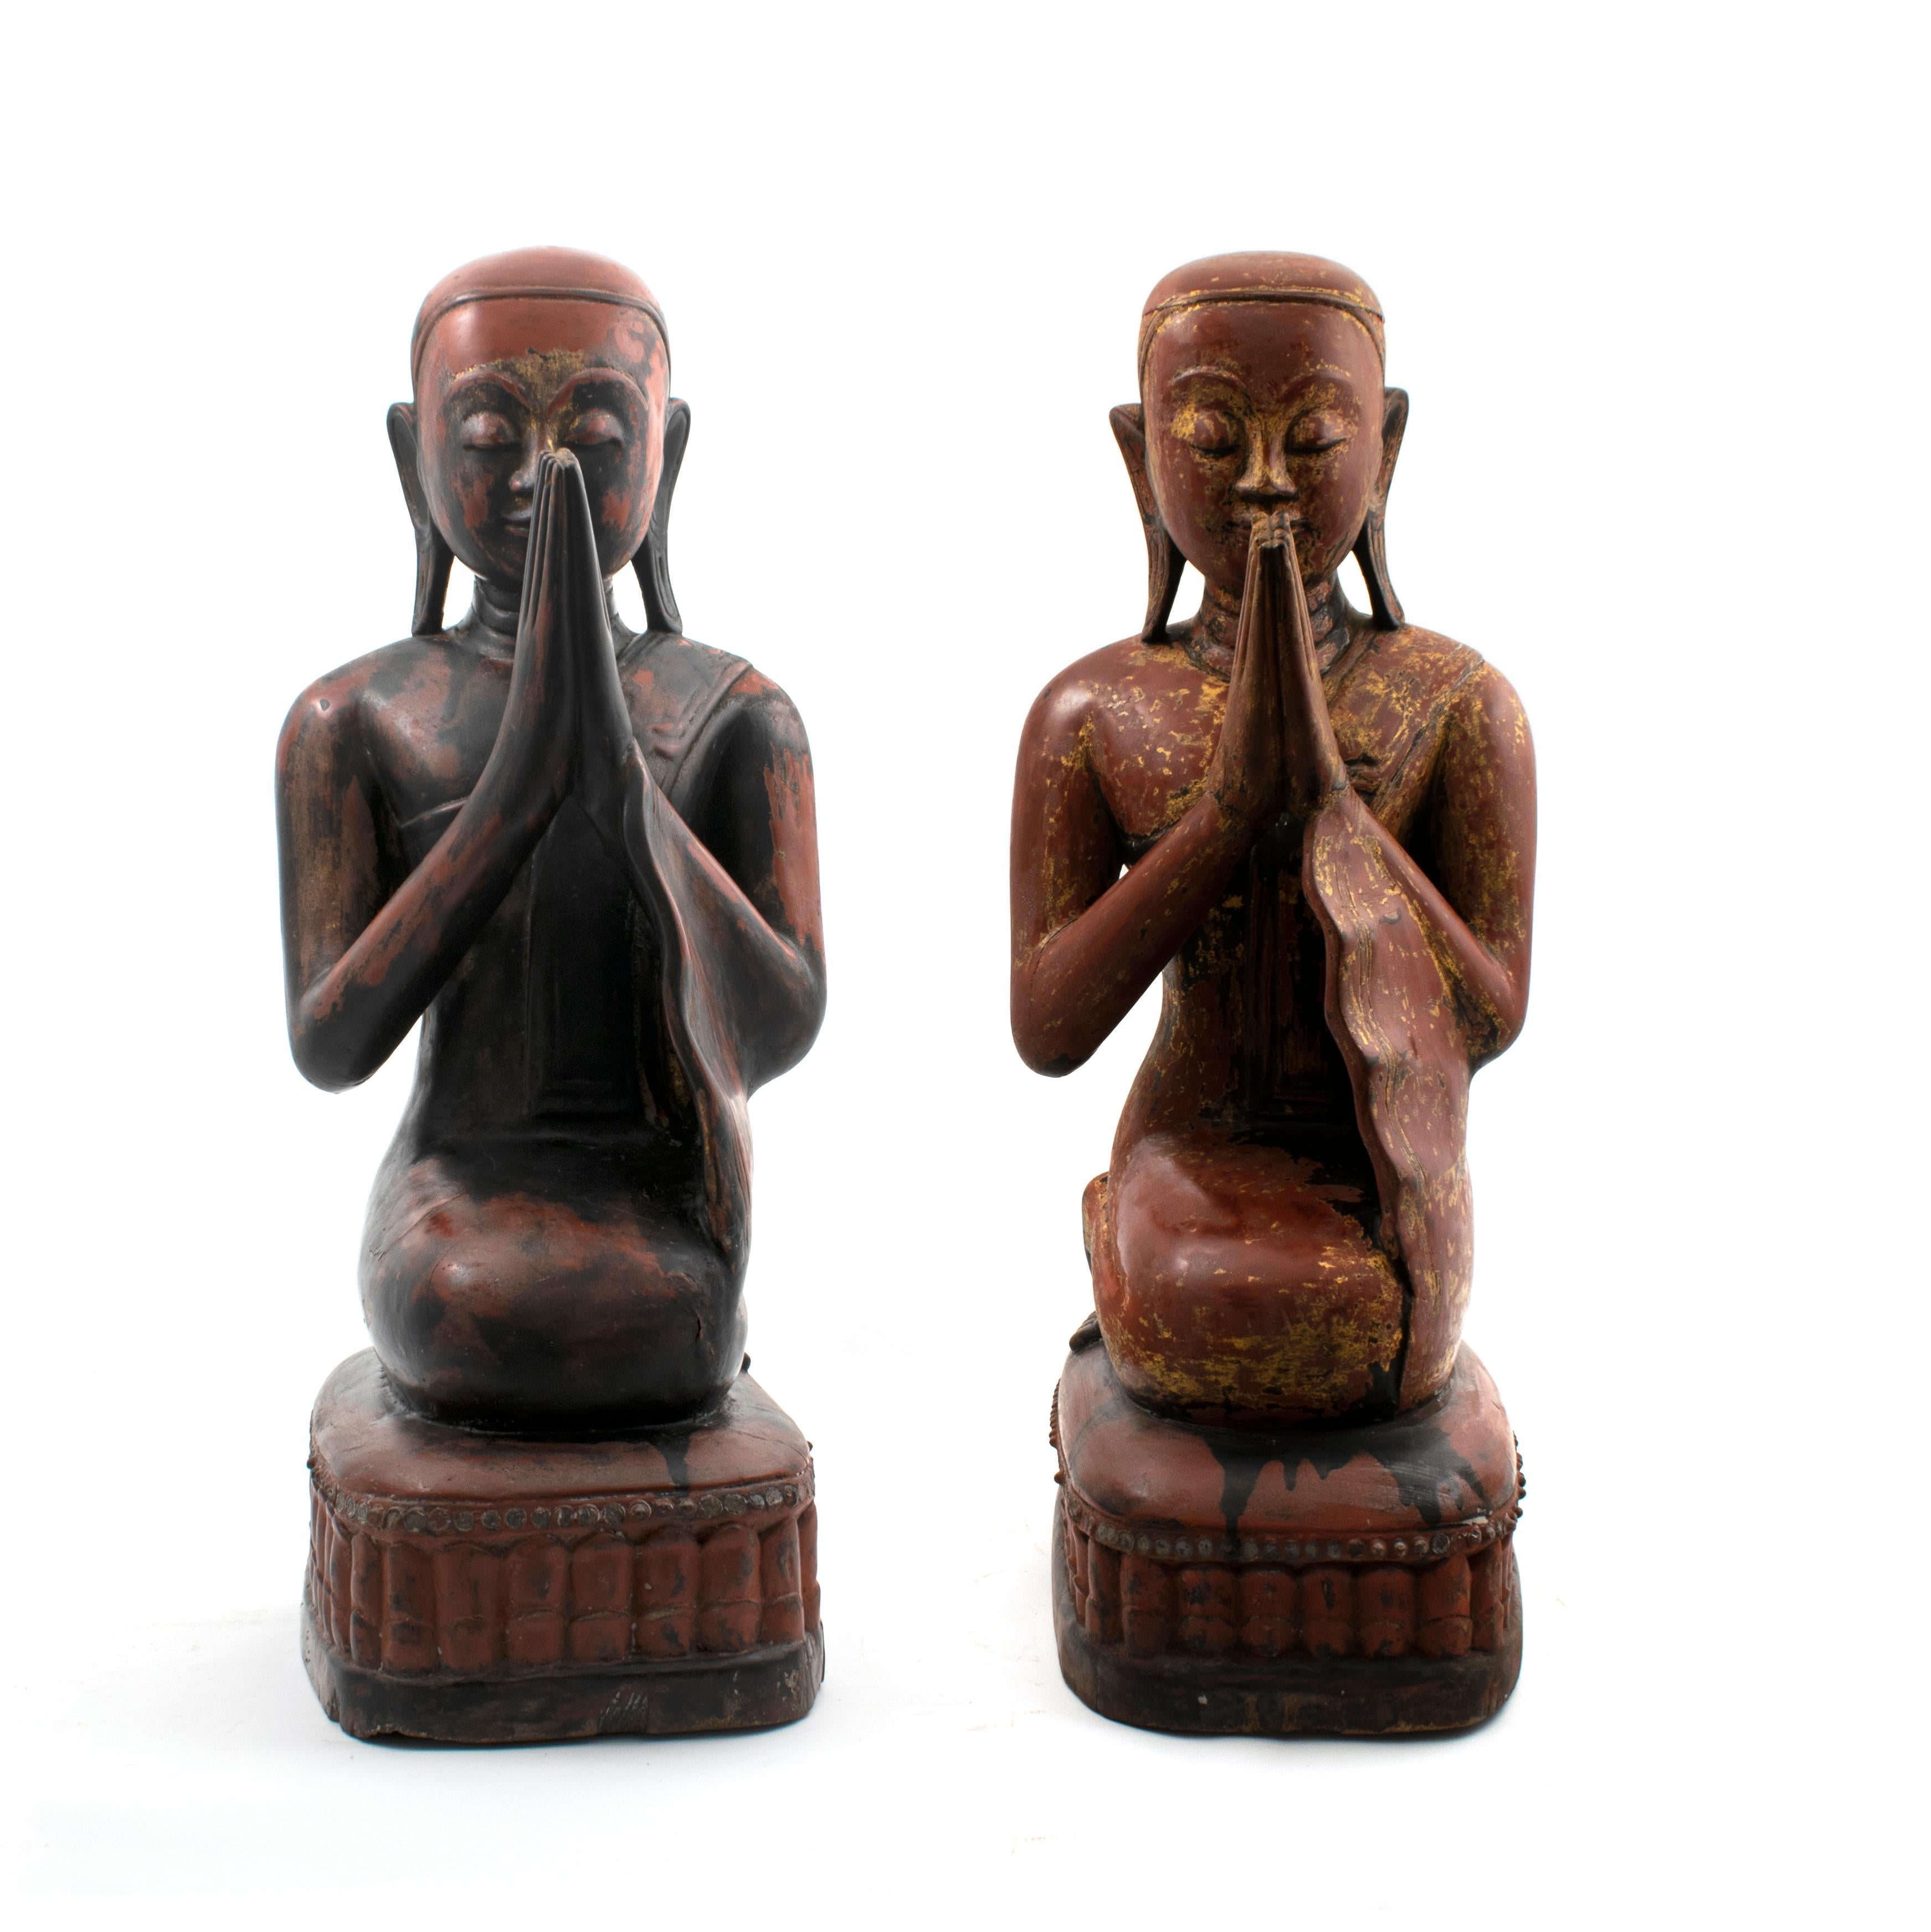 Rare pair of large kneeling monks in the position of prayer/meditation.
Red and black lacquered Burmese teak wood with remnants of gold leaf. Untouched original condition with beautiful age-related patina.
Very beautiful with peaceful facial